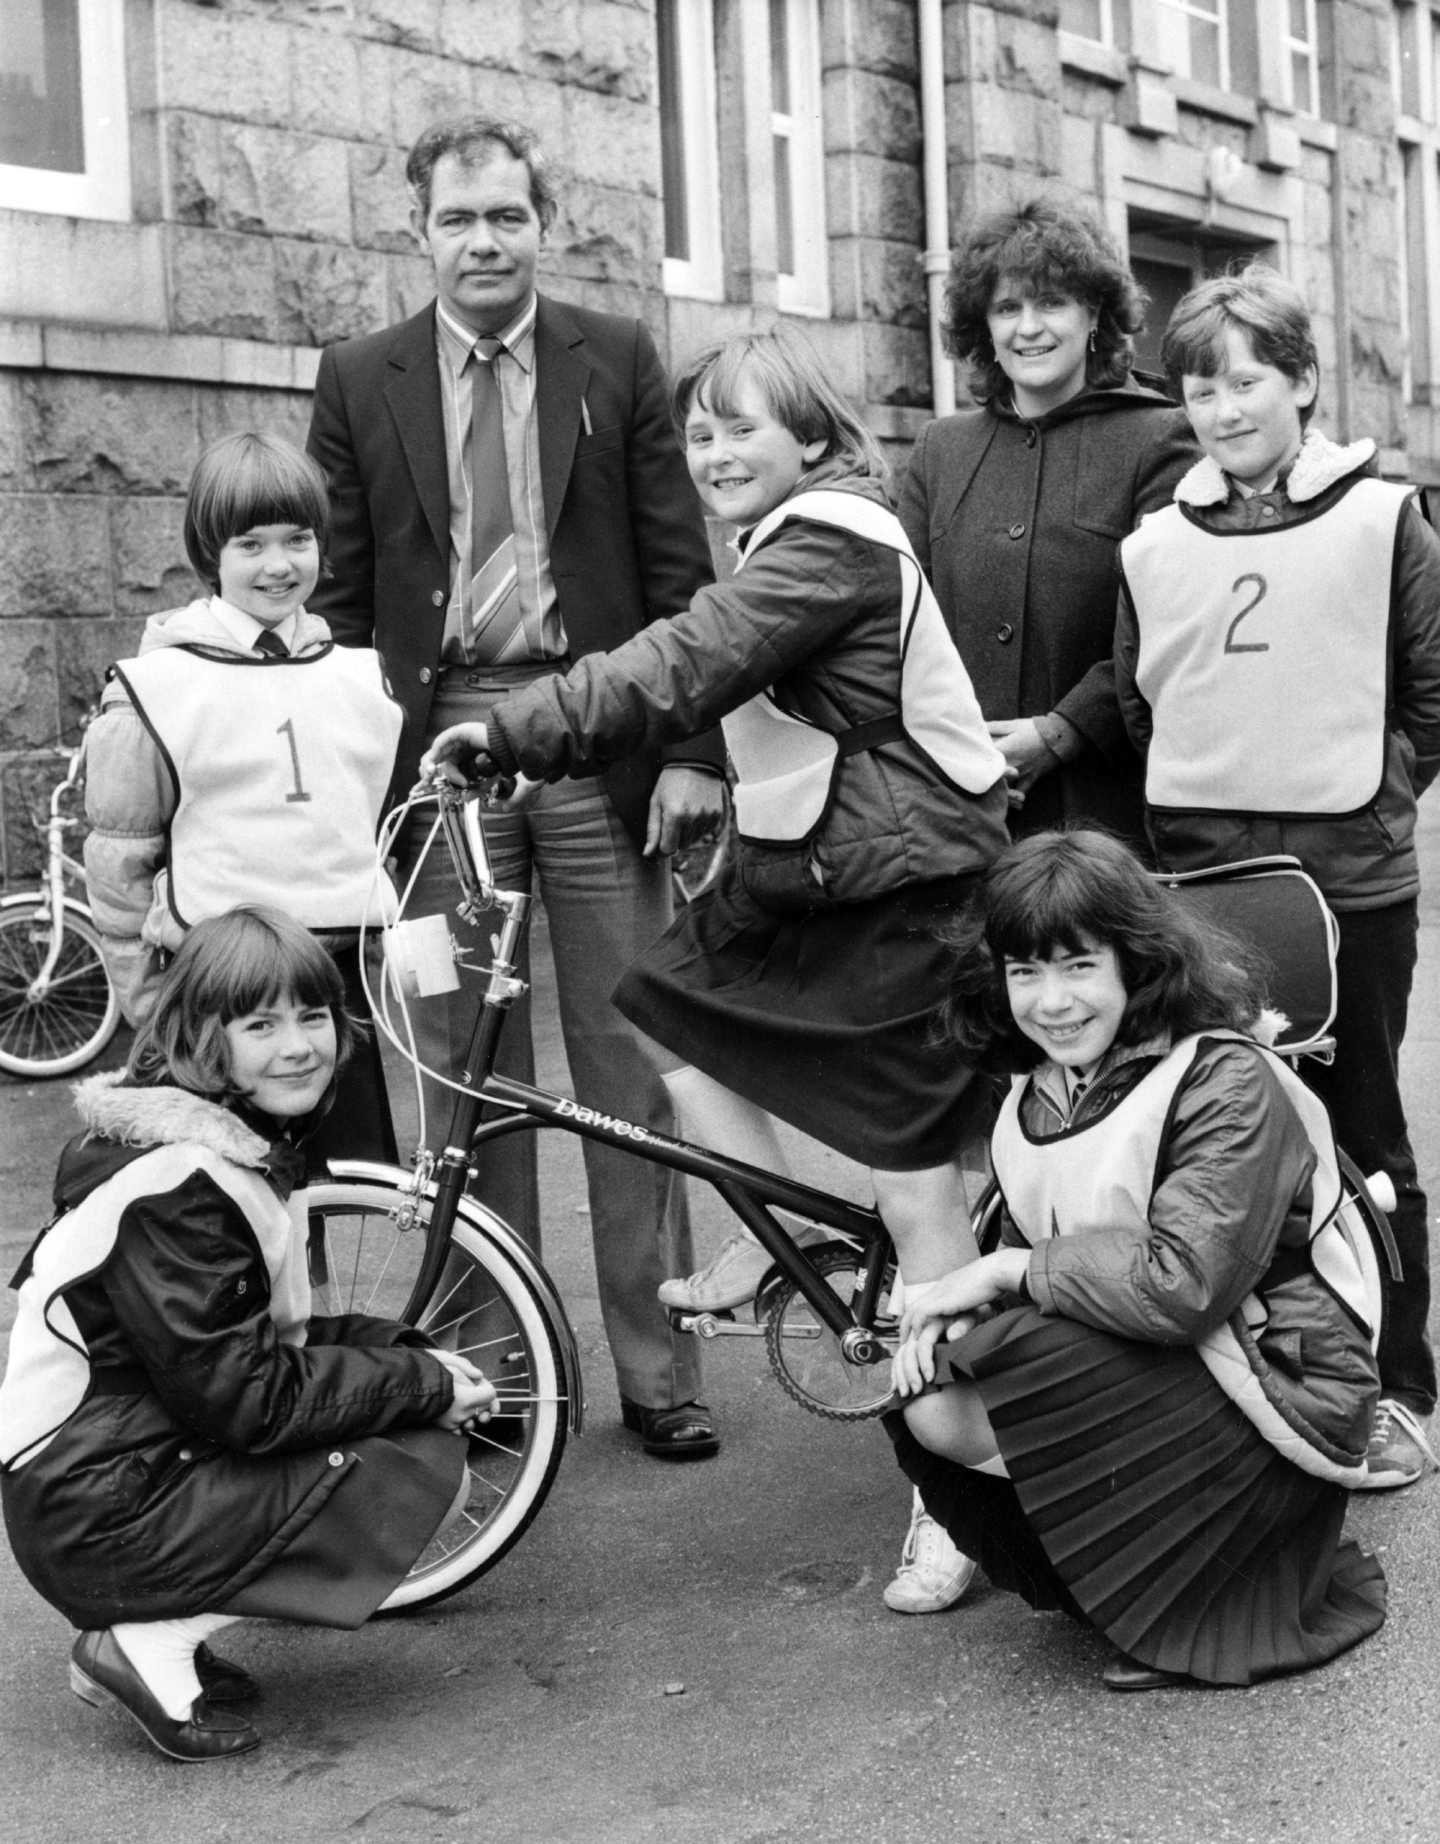 Pupil Debbie Noble on a bicycle in preparation for a road safety competition with school friends Carole Reid, Brenda King, Alison Walker and Michelle Capes in 1983.